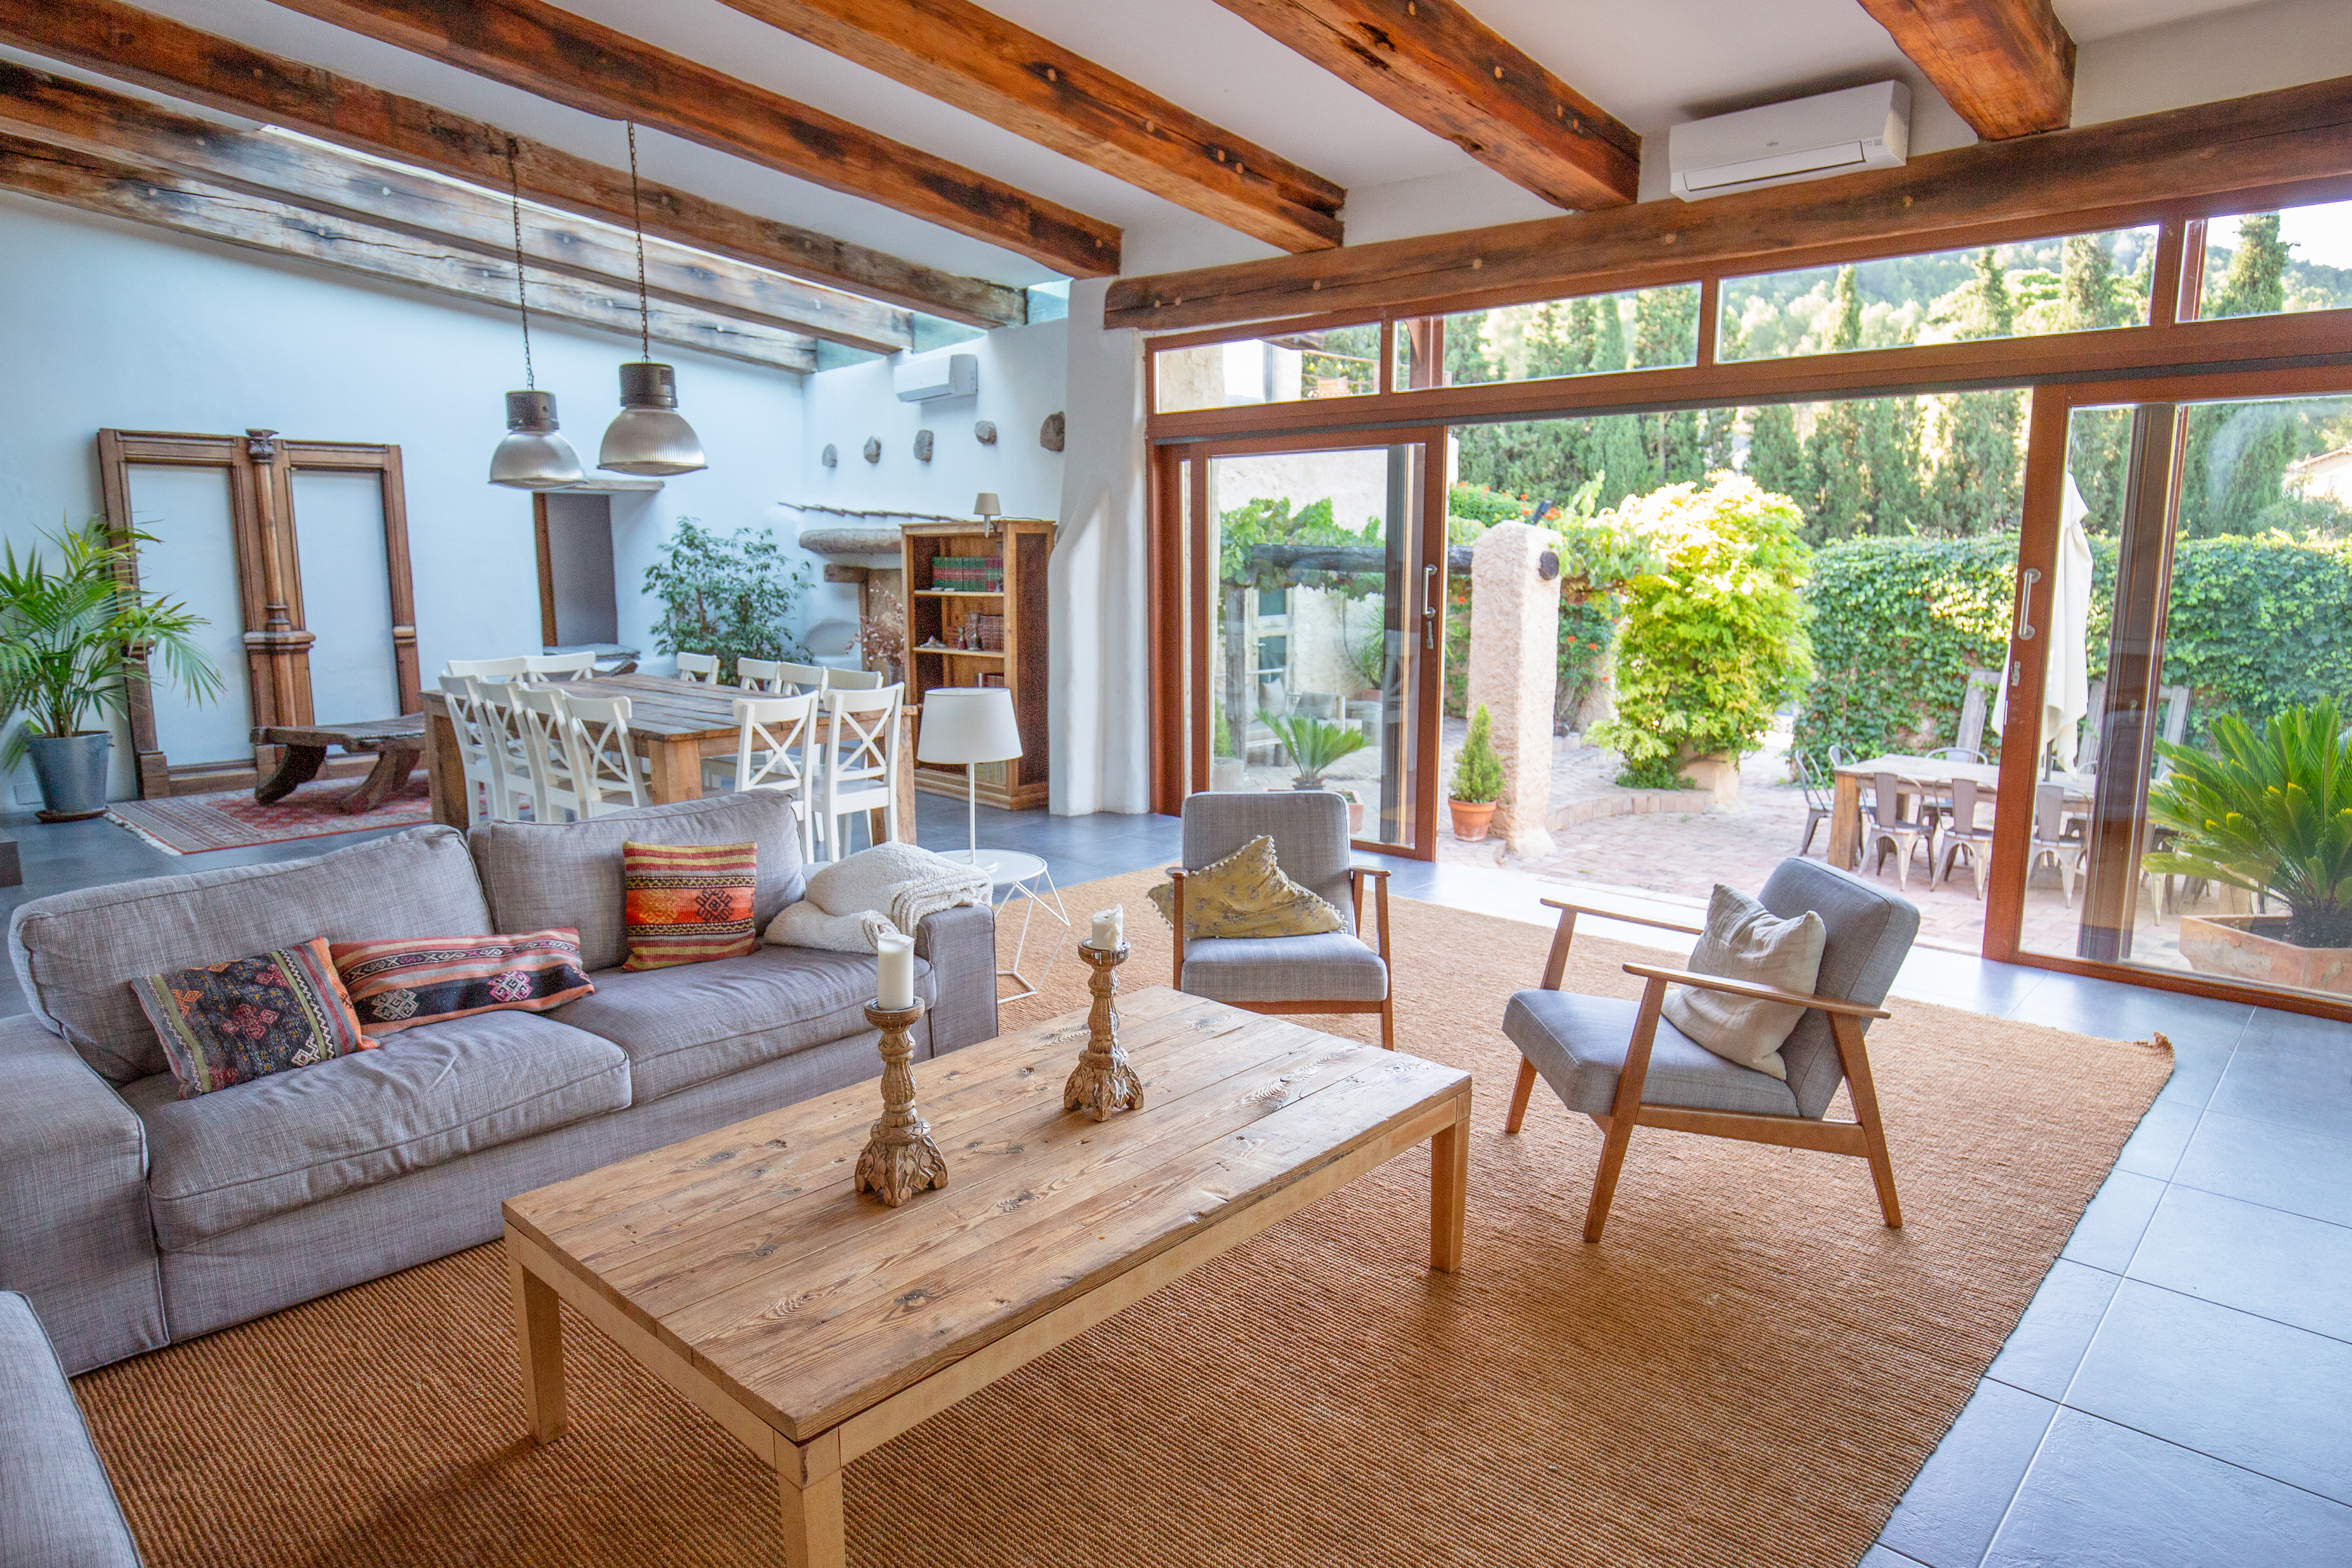 large living room with exposed wood beams lined up against the ceiling